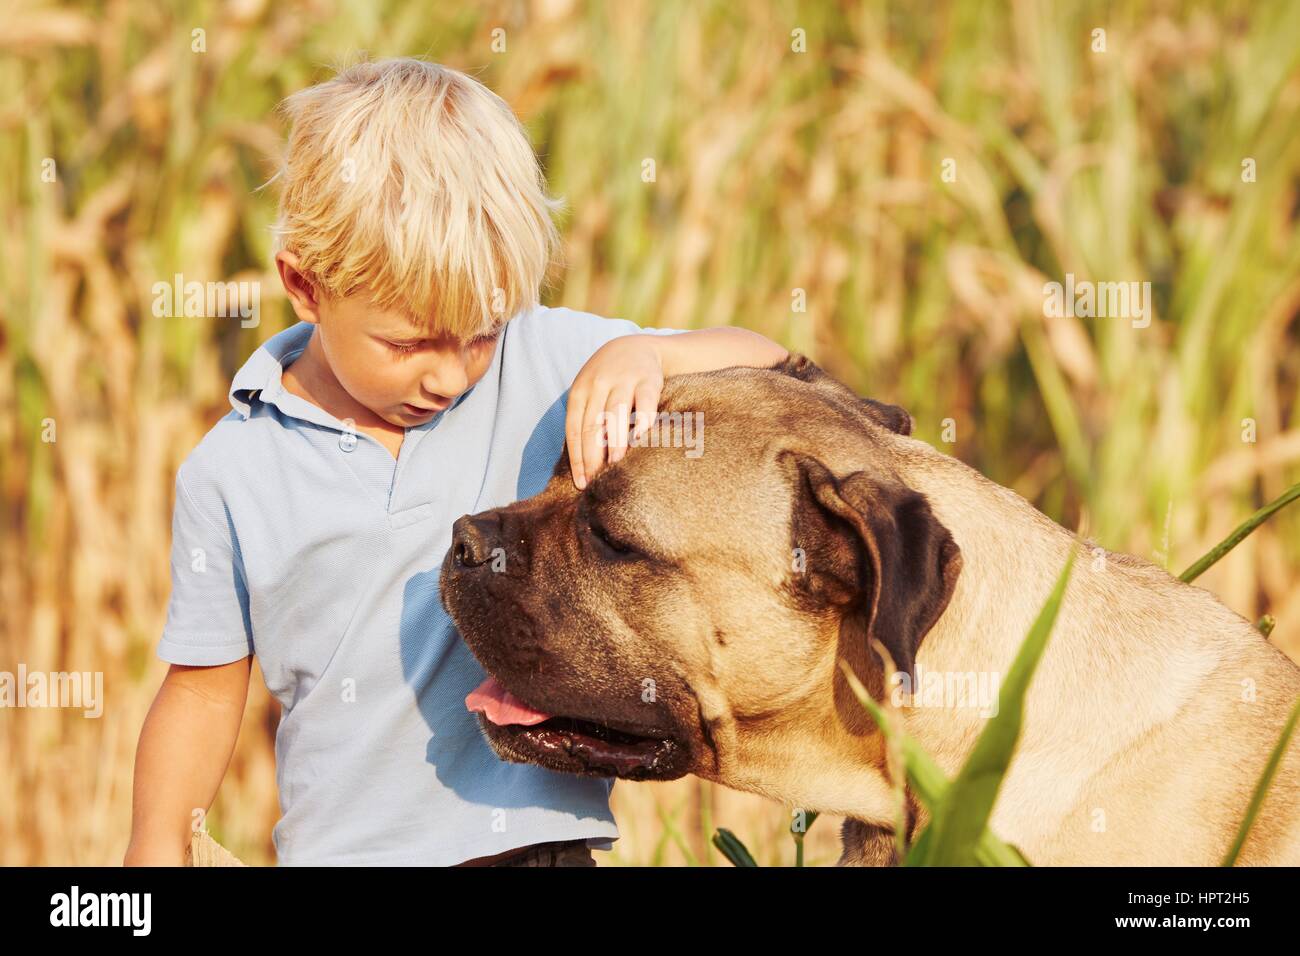 Little boy is playing with his large dog. Stock Photo